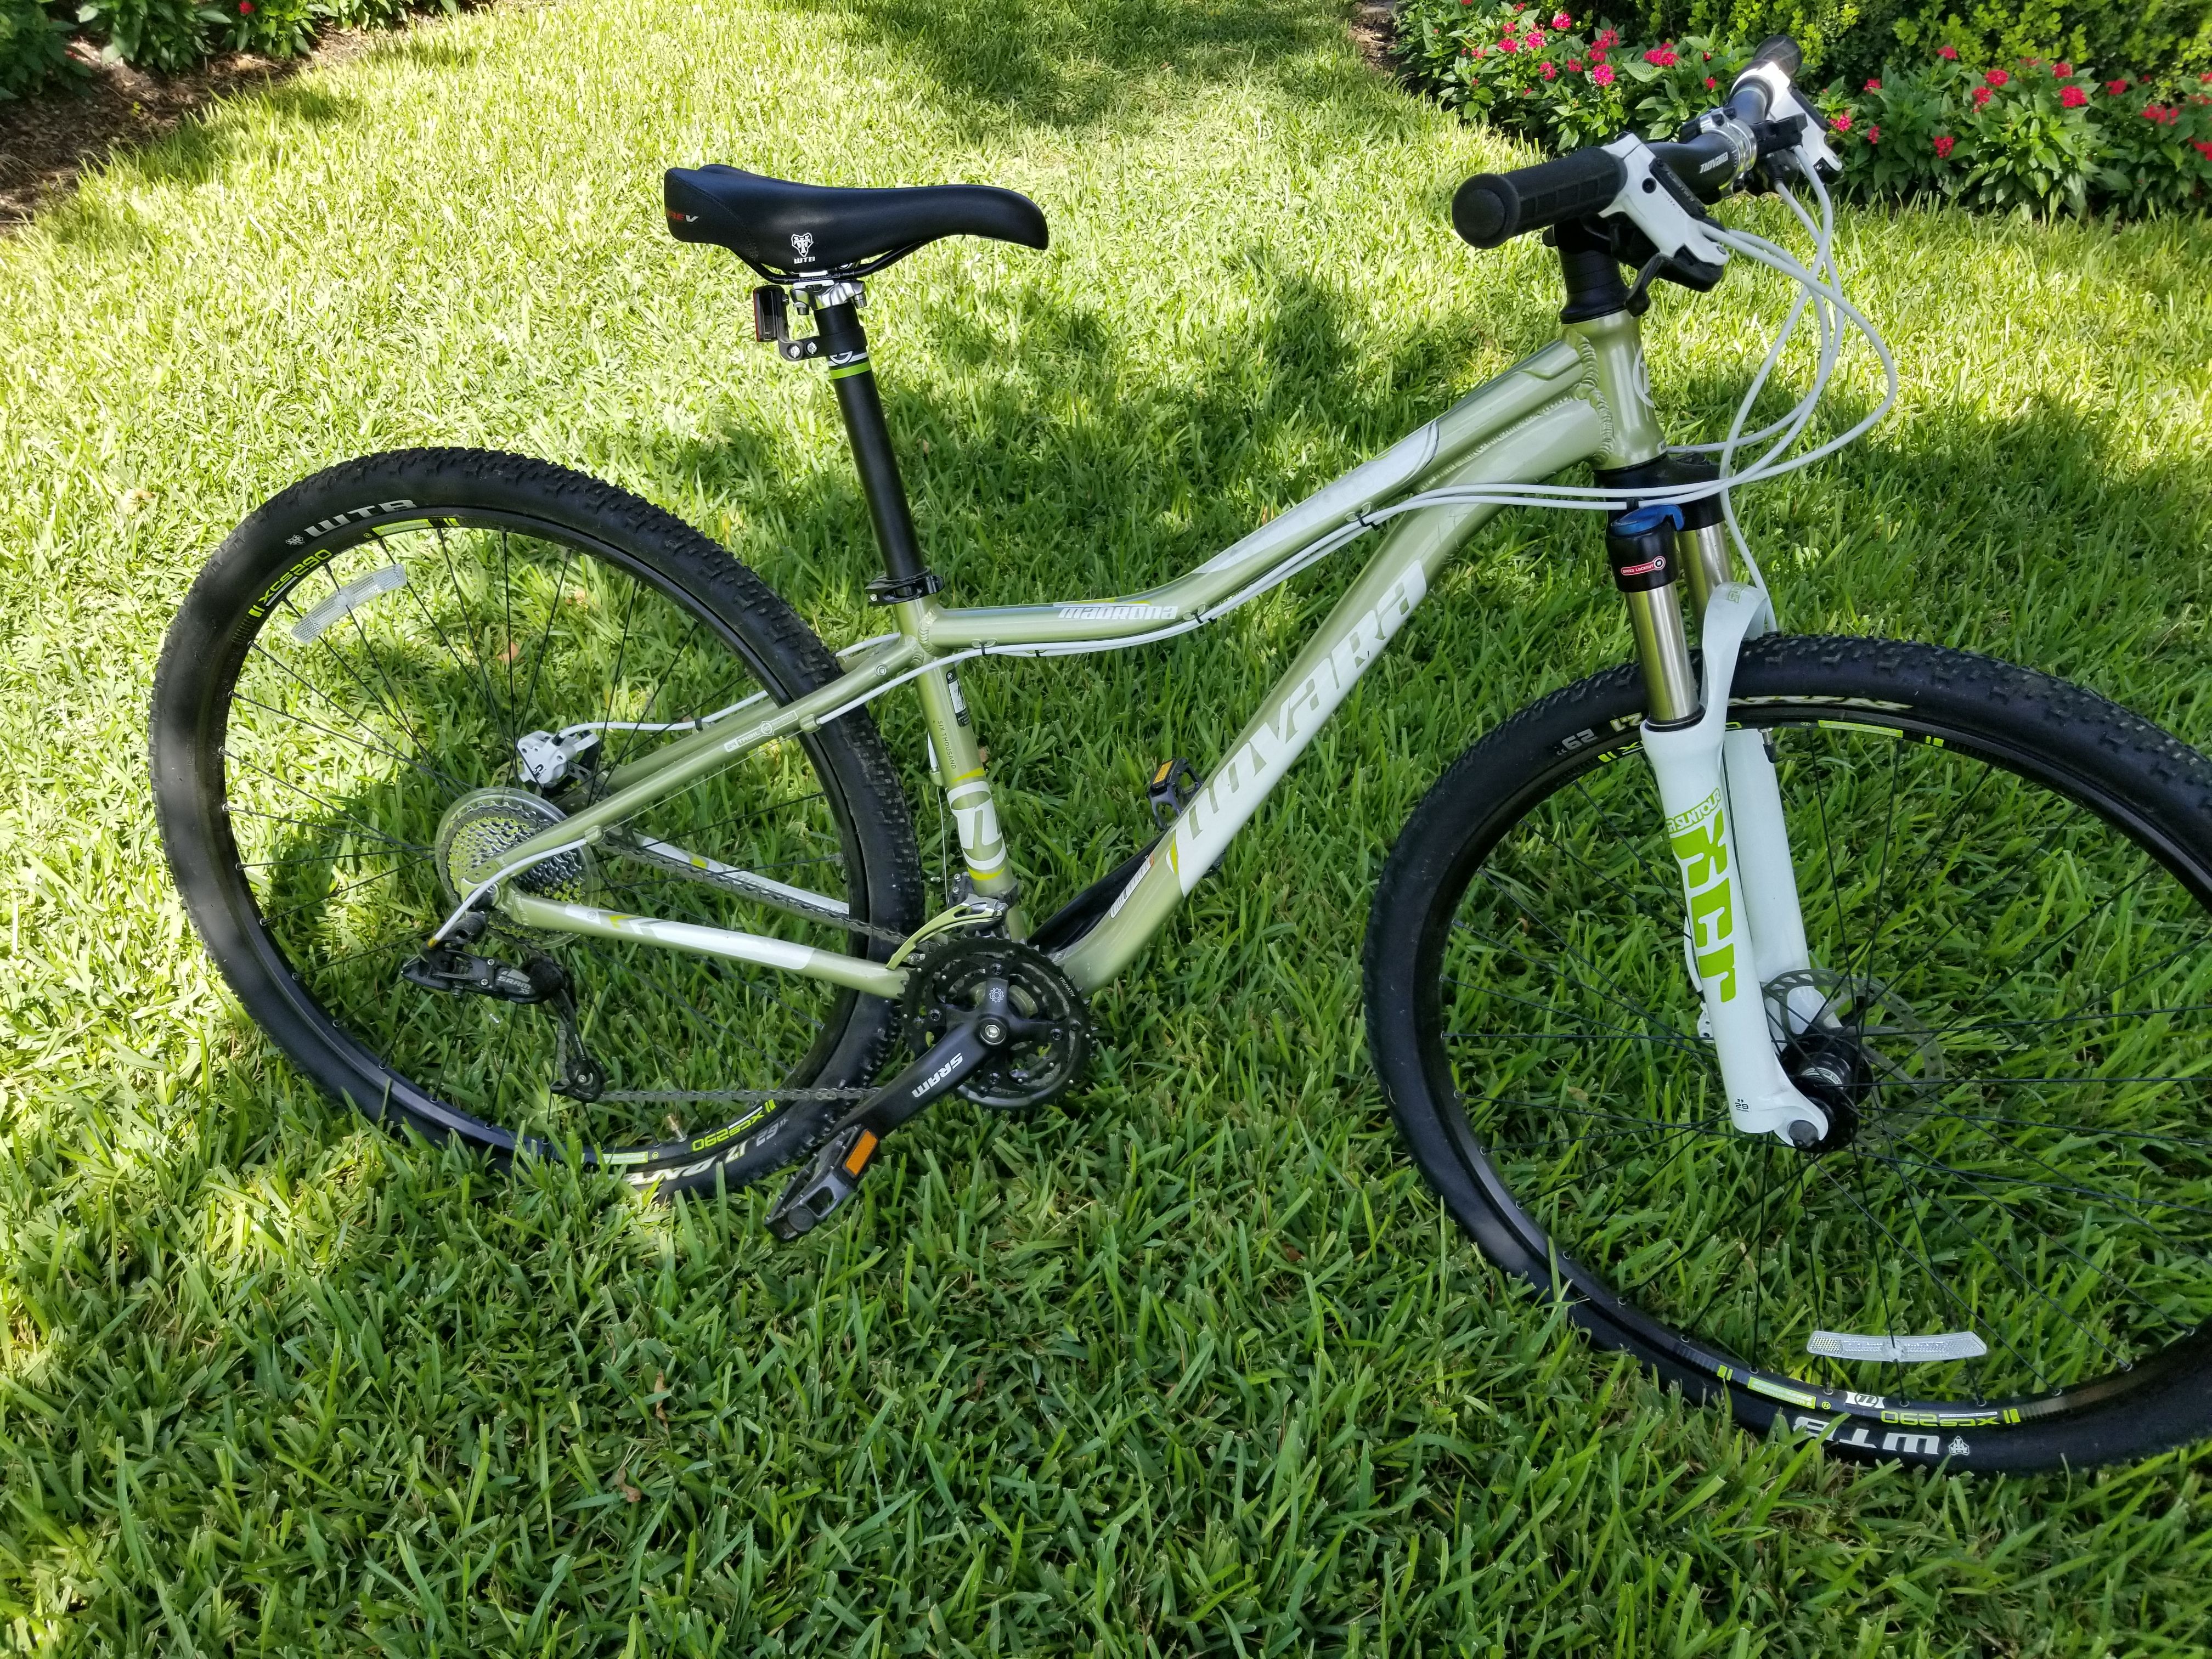 Women's Novara Madrona 29R Mountain Bike Color: Seafoam Green Brand new Have receipts, handbook, and all paperwork.(Purchased from REI)